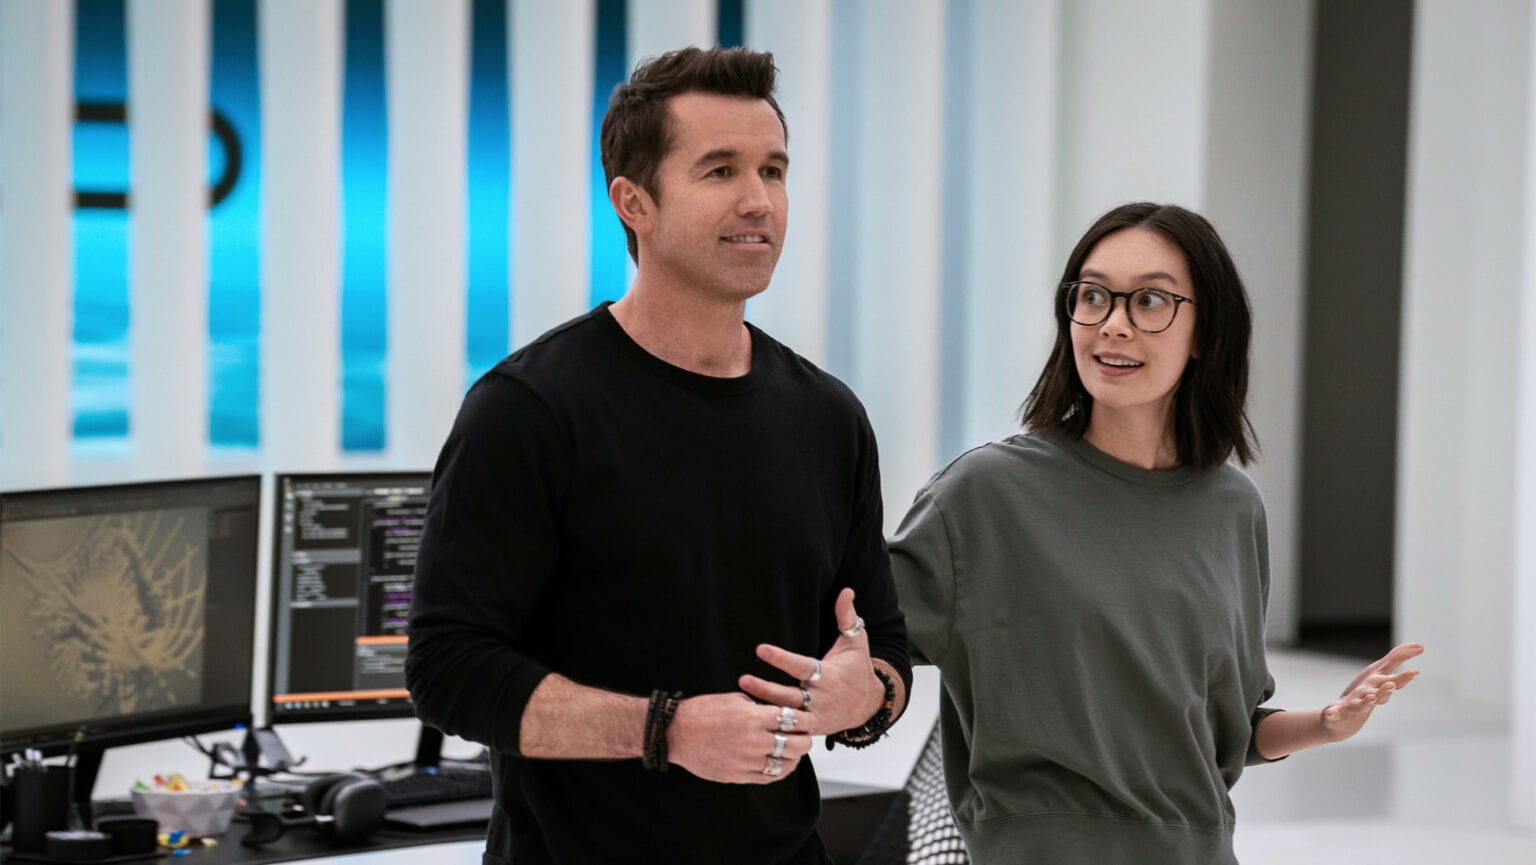 Rob McElhenney and Charlotte Nicdao in “Mythic Quest” season three, premiering fall 2022 on Apple TV+.